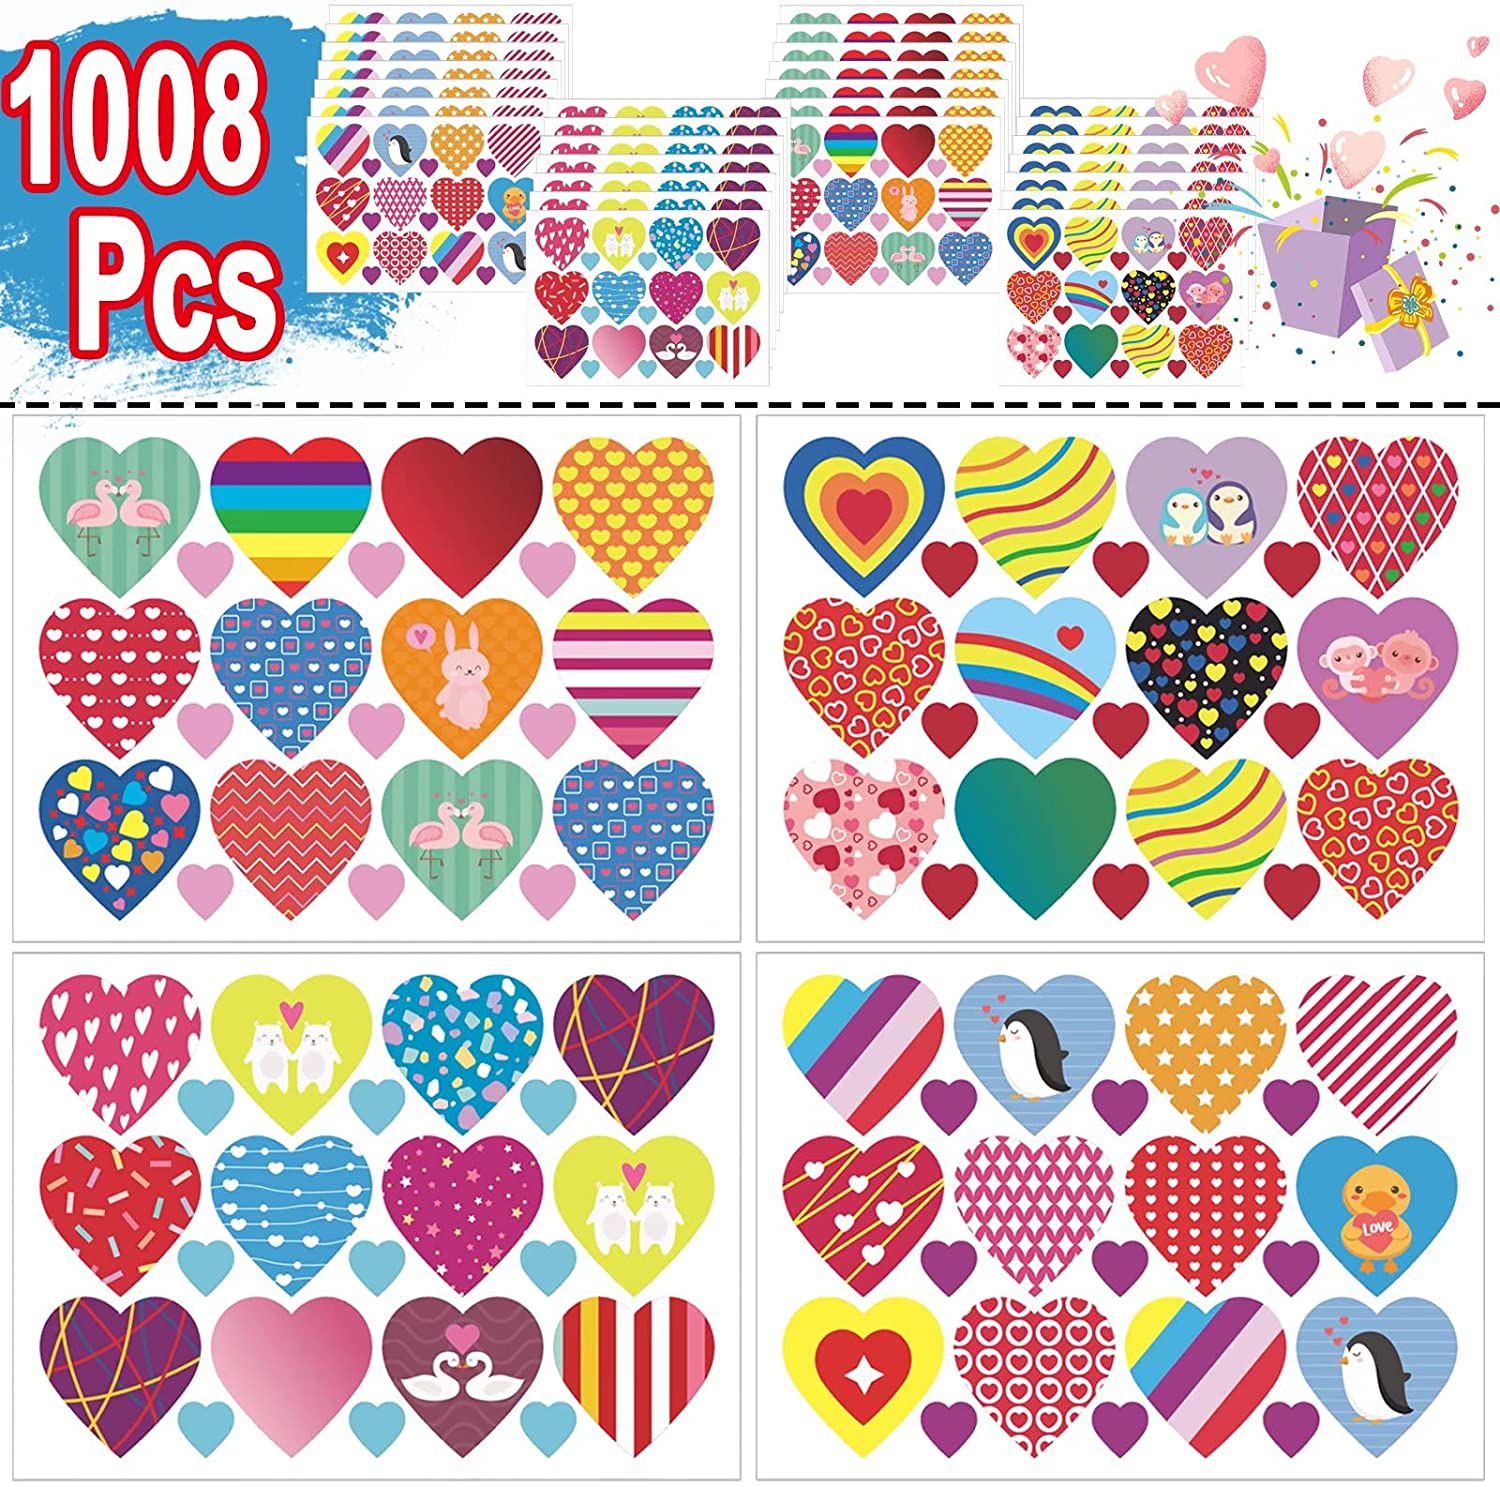 Wedding Birthday Card-Making Party Envelopes 1000 Pieces Valentines Day Heart Stickers 1/1.5 Self-Adhesive Heart-Shaped Crafting Stickers Arts Decorations for DIY Scrapbooking 